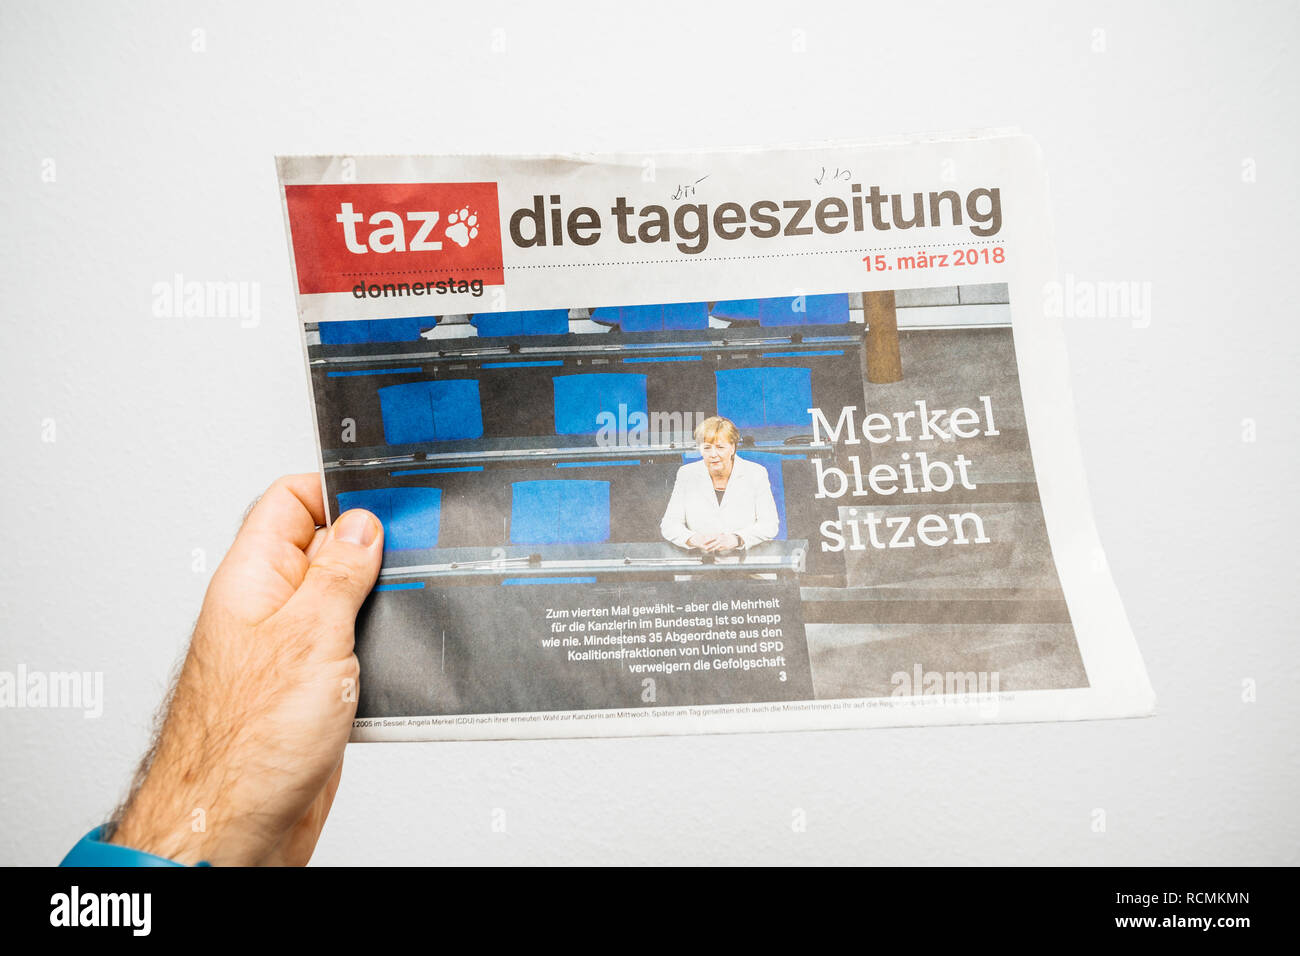 PARIS, FRANCE - MAR 19, 2017: Man reading German die tageszeitung newspaper at press kiosk featuring Angela Dorothea Merkel re election as Chancellor of Germany Stock Photo